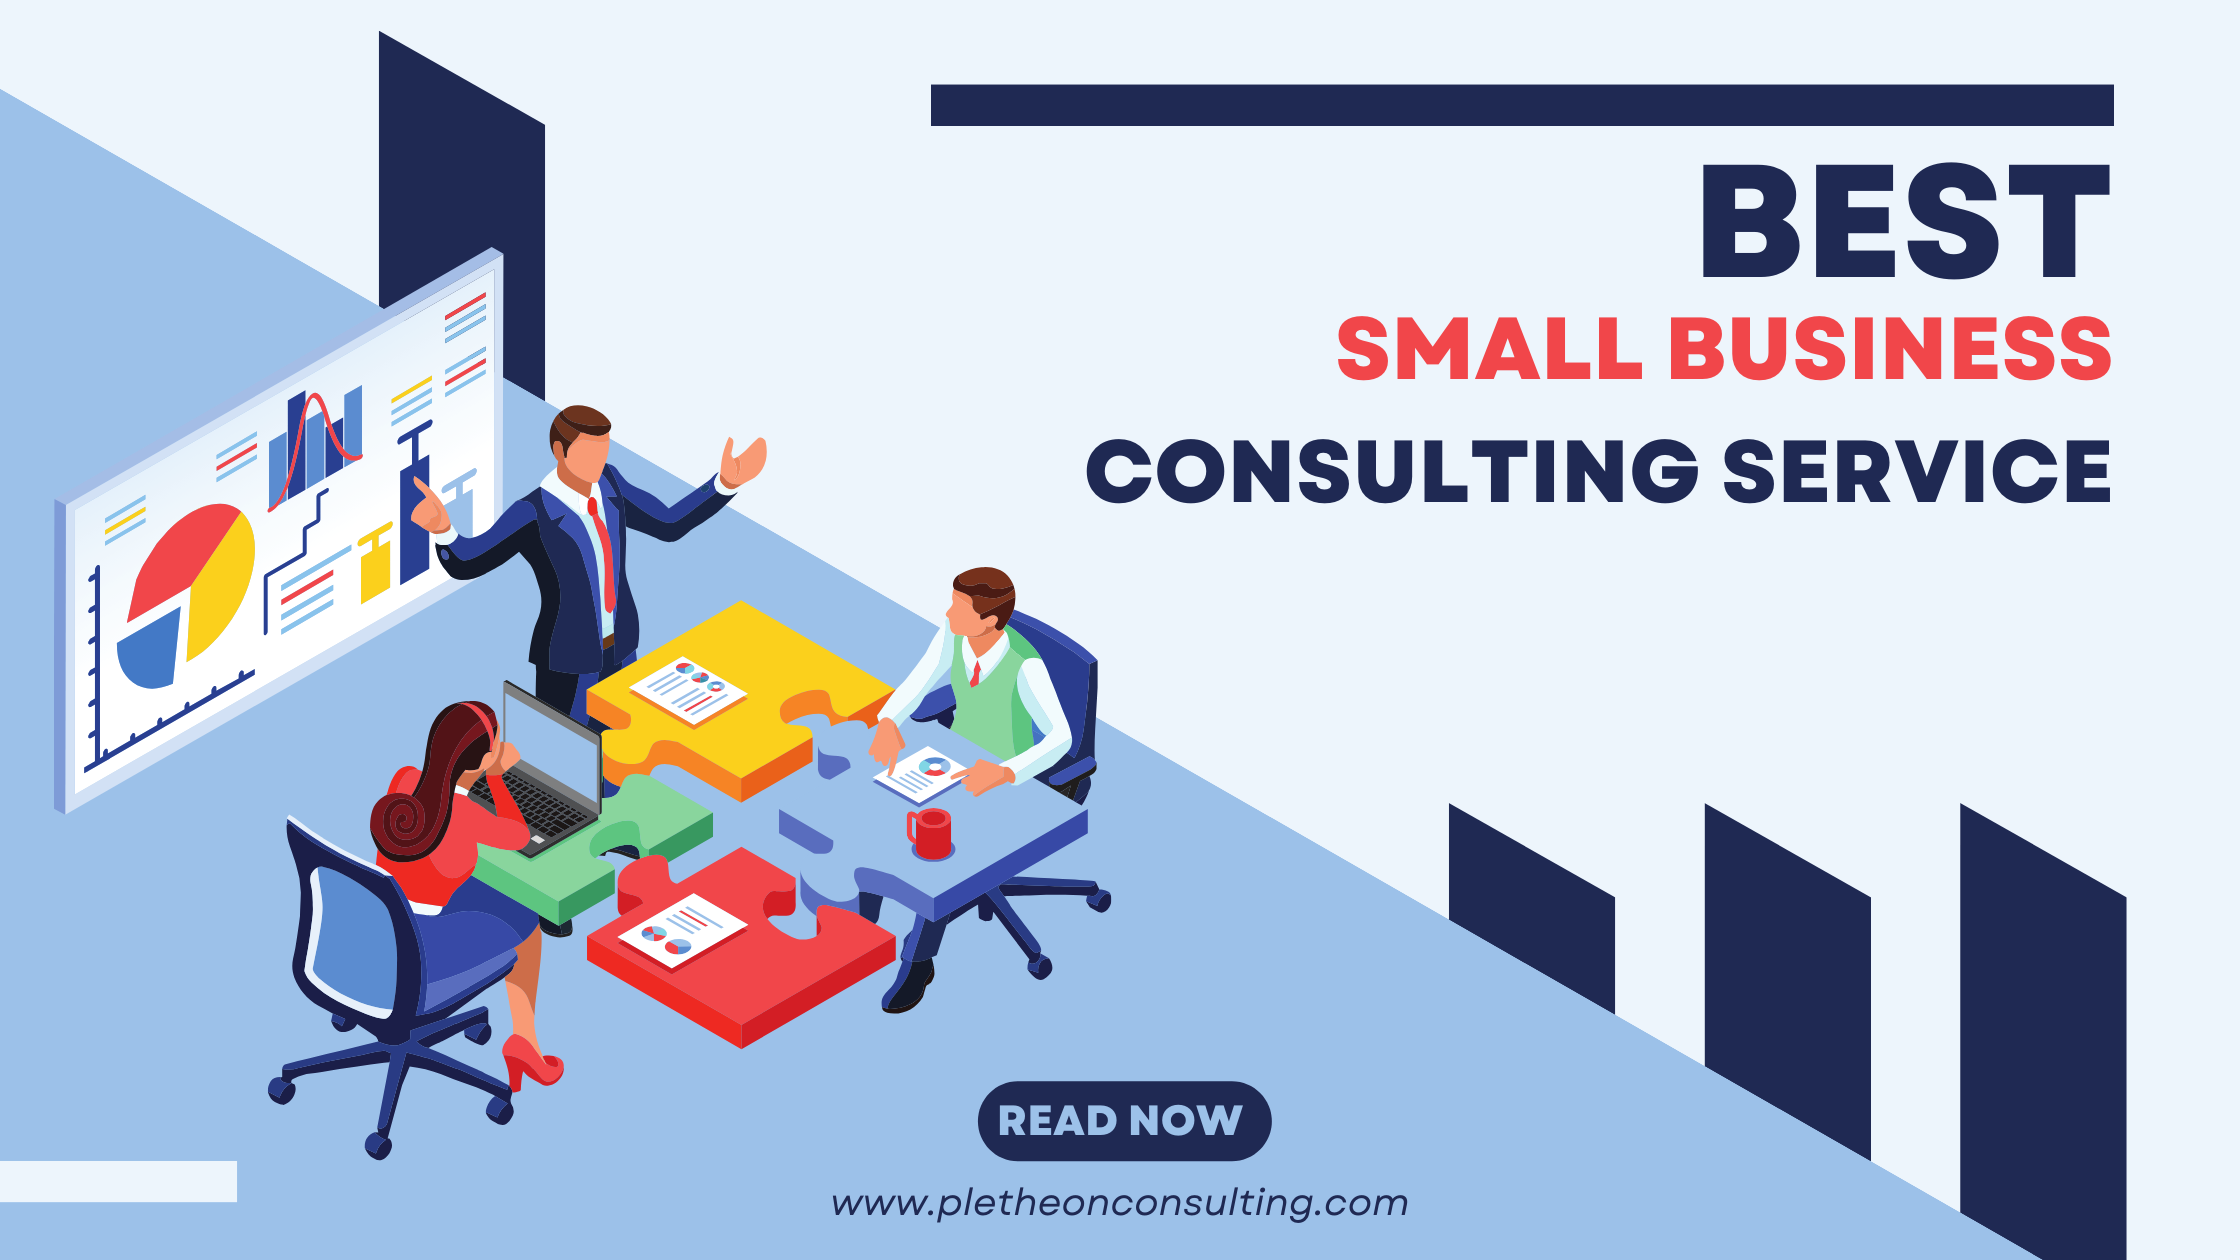 www.pletheonconsulting.com 12 India's Best small business consulting service | startup consulting